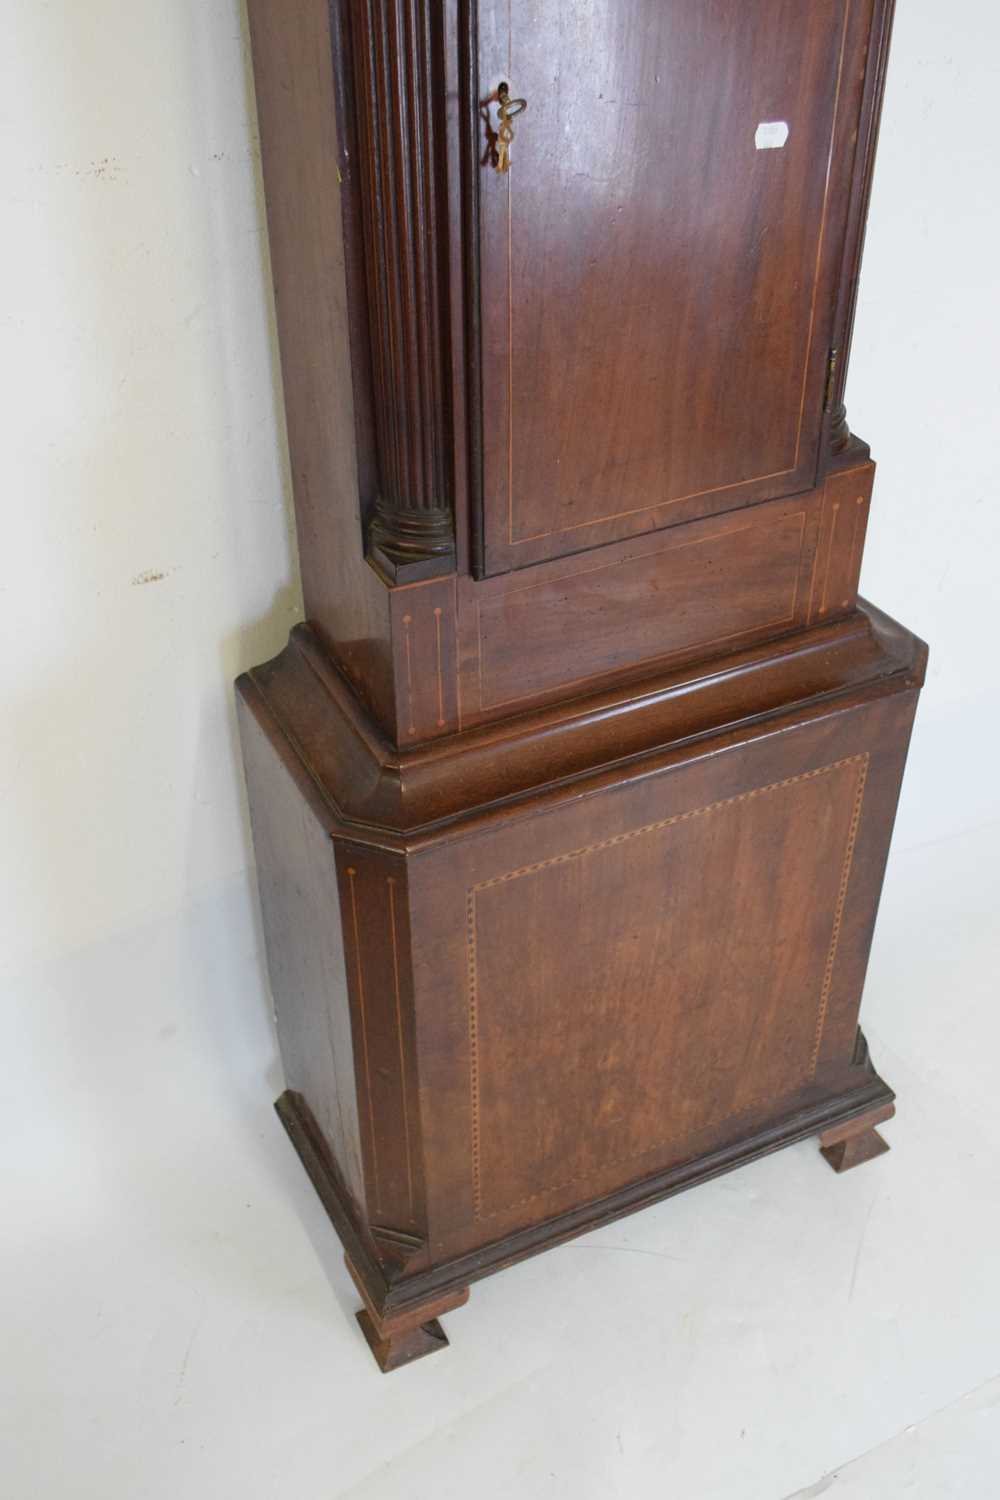 Early 19th Century inlaid mahogany cased 8-day brass dial longcase clock - Richard Hornby, Oldham - Image 9 of 14